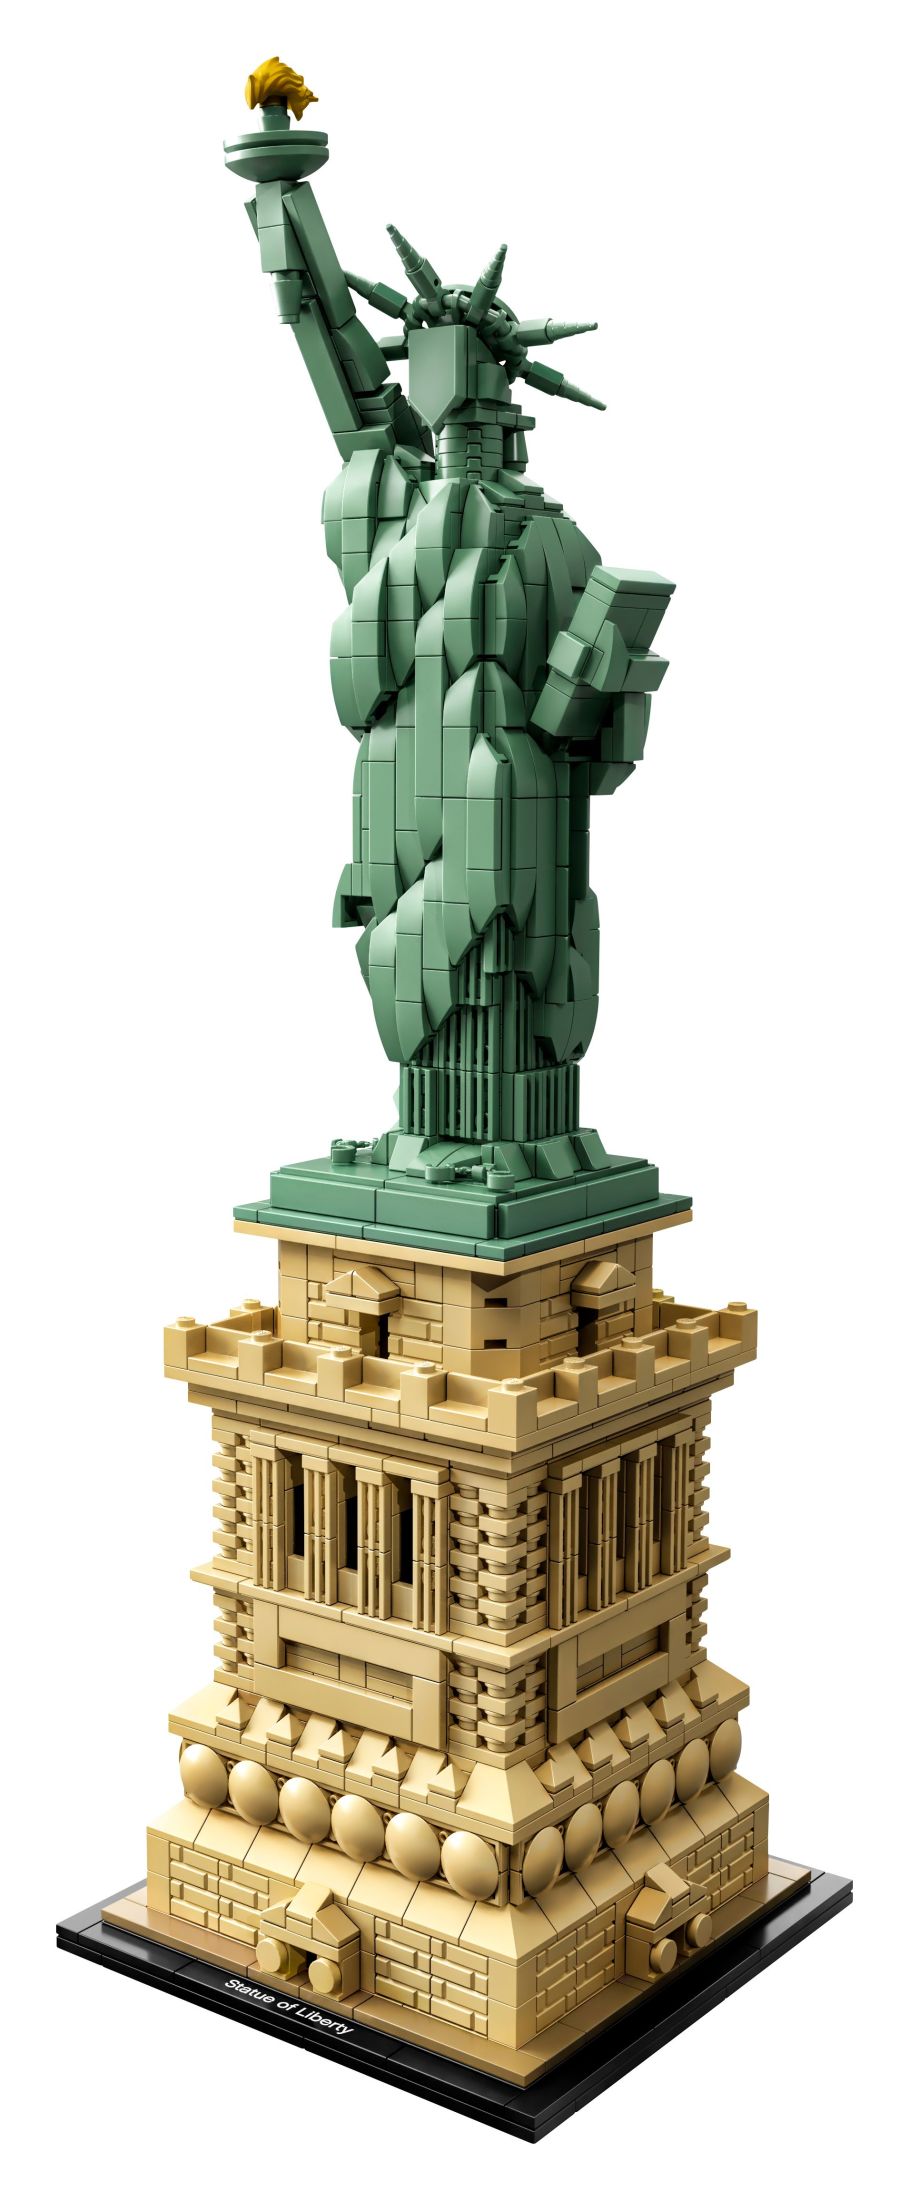 LEGO Architecture Statue of Liberty 21042 Model Building Set - Collectible New York City Souvenir, Creative Home Décor or Office Centerpiece, Great Gift Idea for Adults and Teens - image 5 of 7